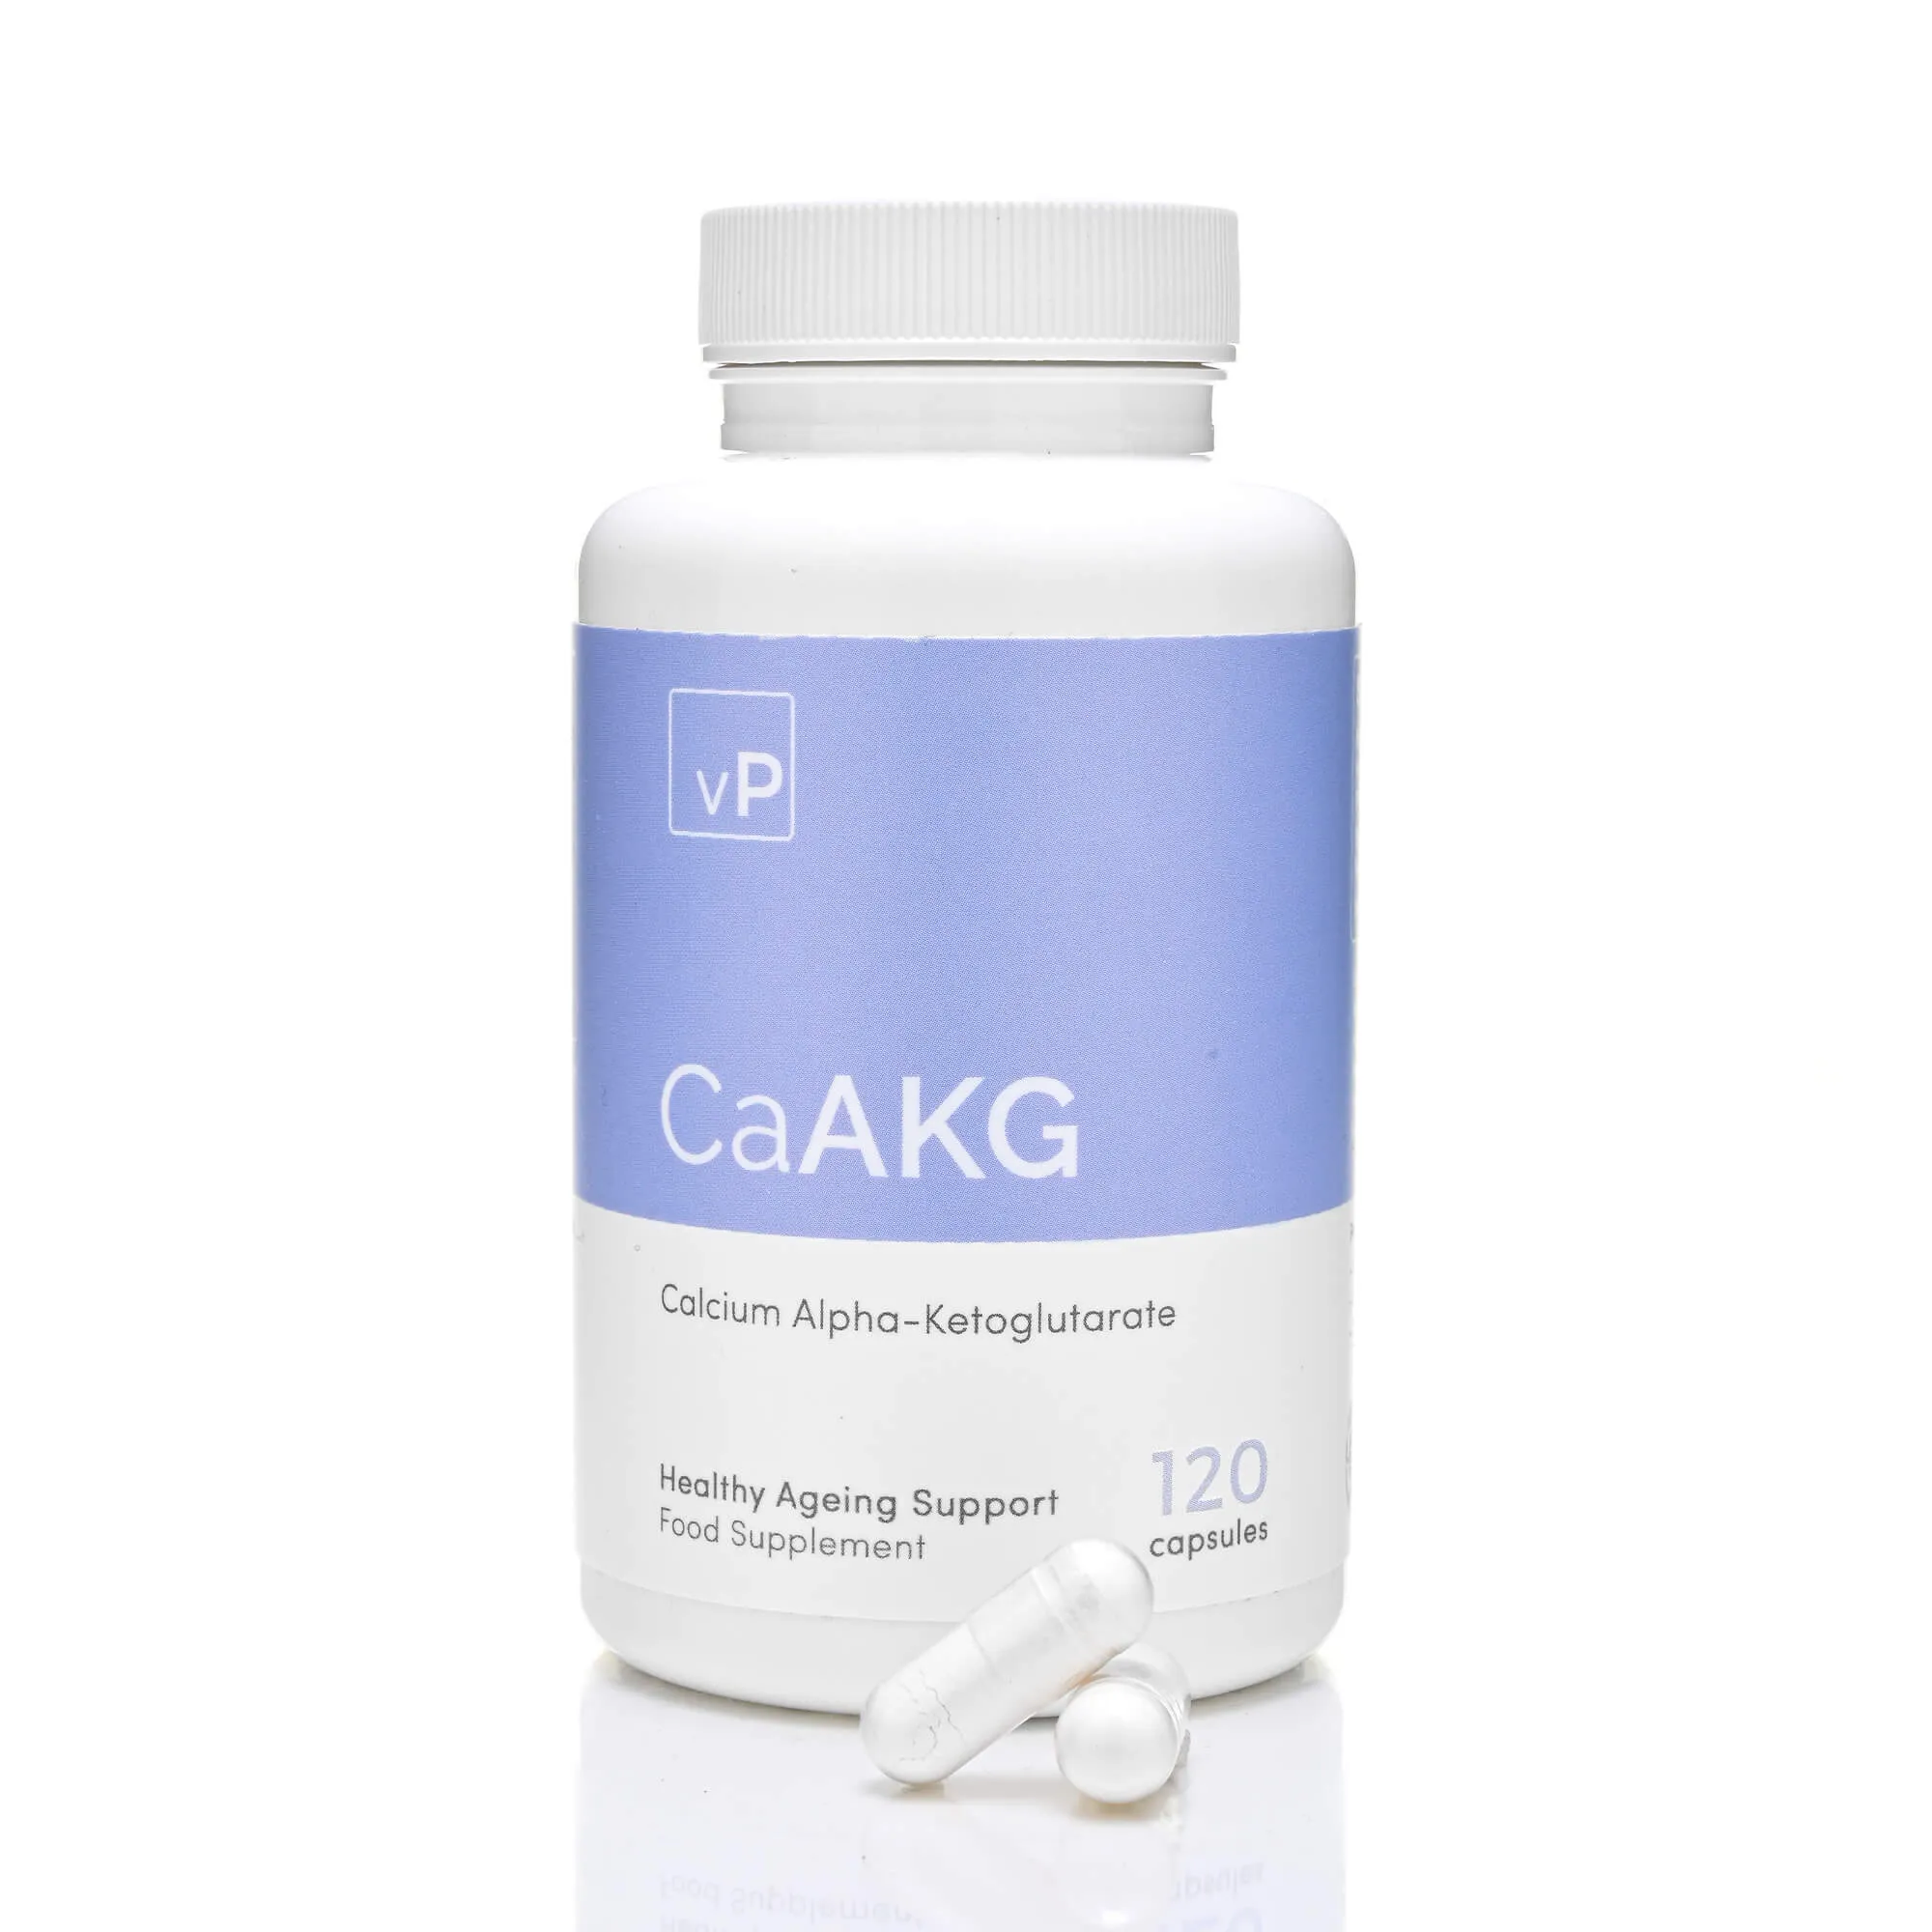 Calcium Alpha-ketoglutarate (Ca-AKG) is a form of calcium salt. It was utilized in a pivotal mouse study, where it demonstrated the ability to extend lifespan, significantly postpone the emergence of age-related ailments, diminish frailty, and lower chronic inflammation.